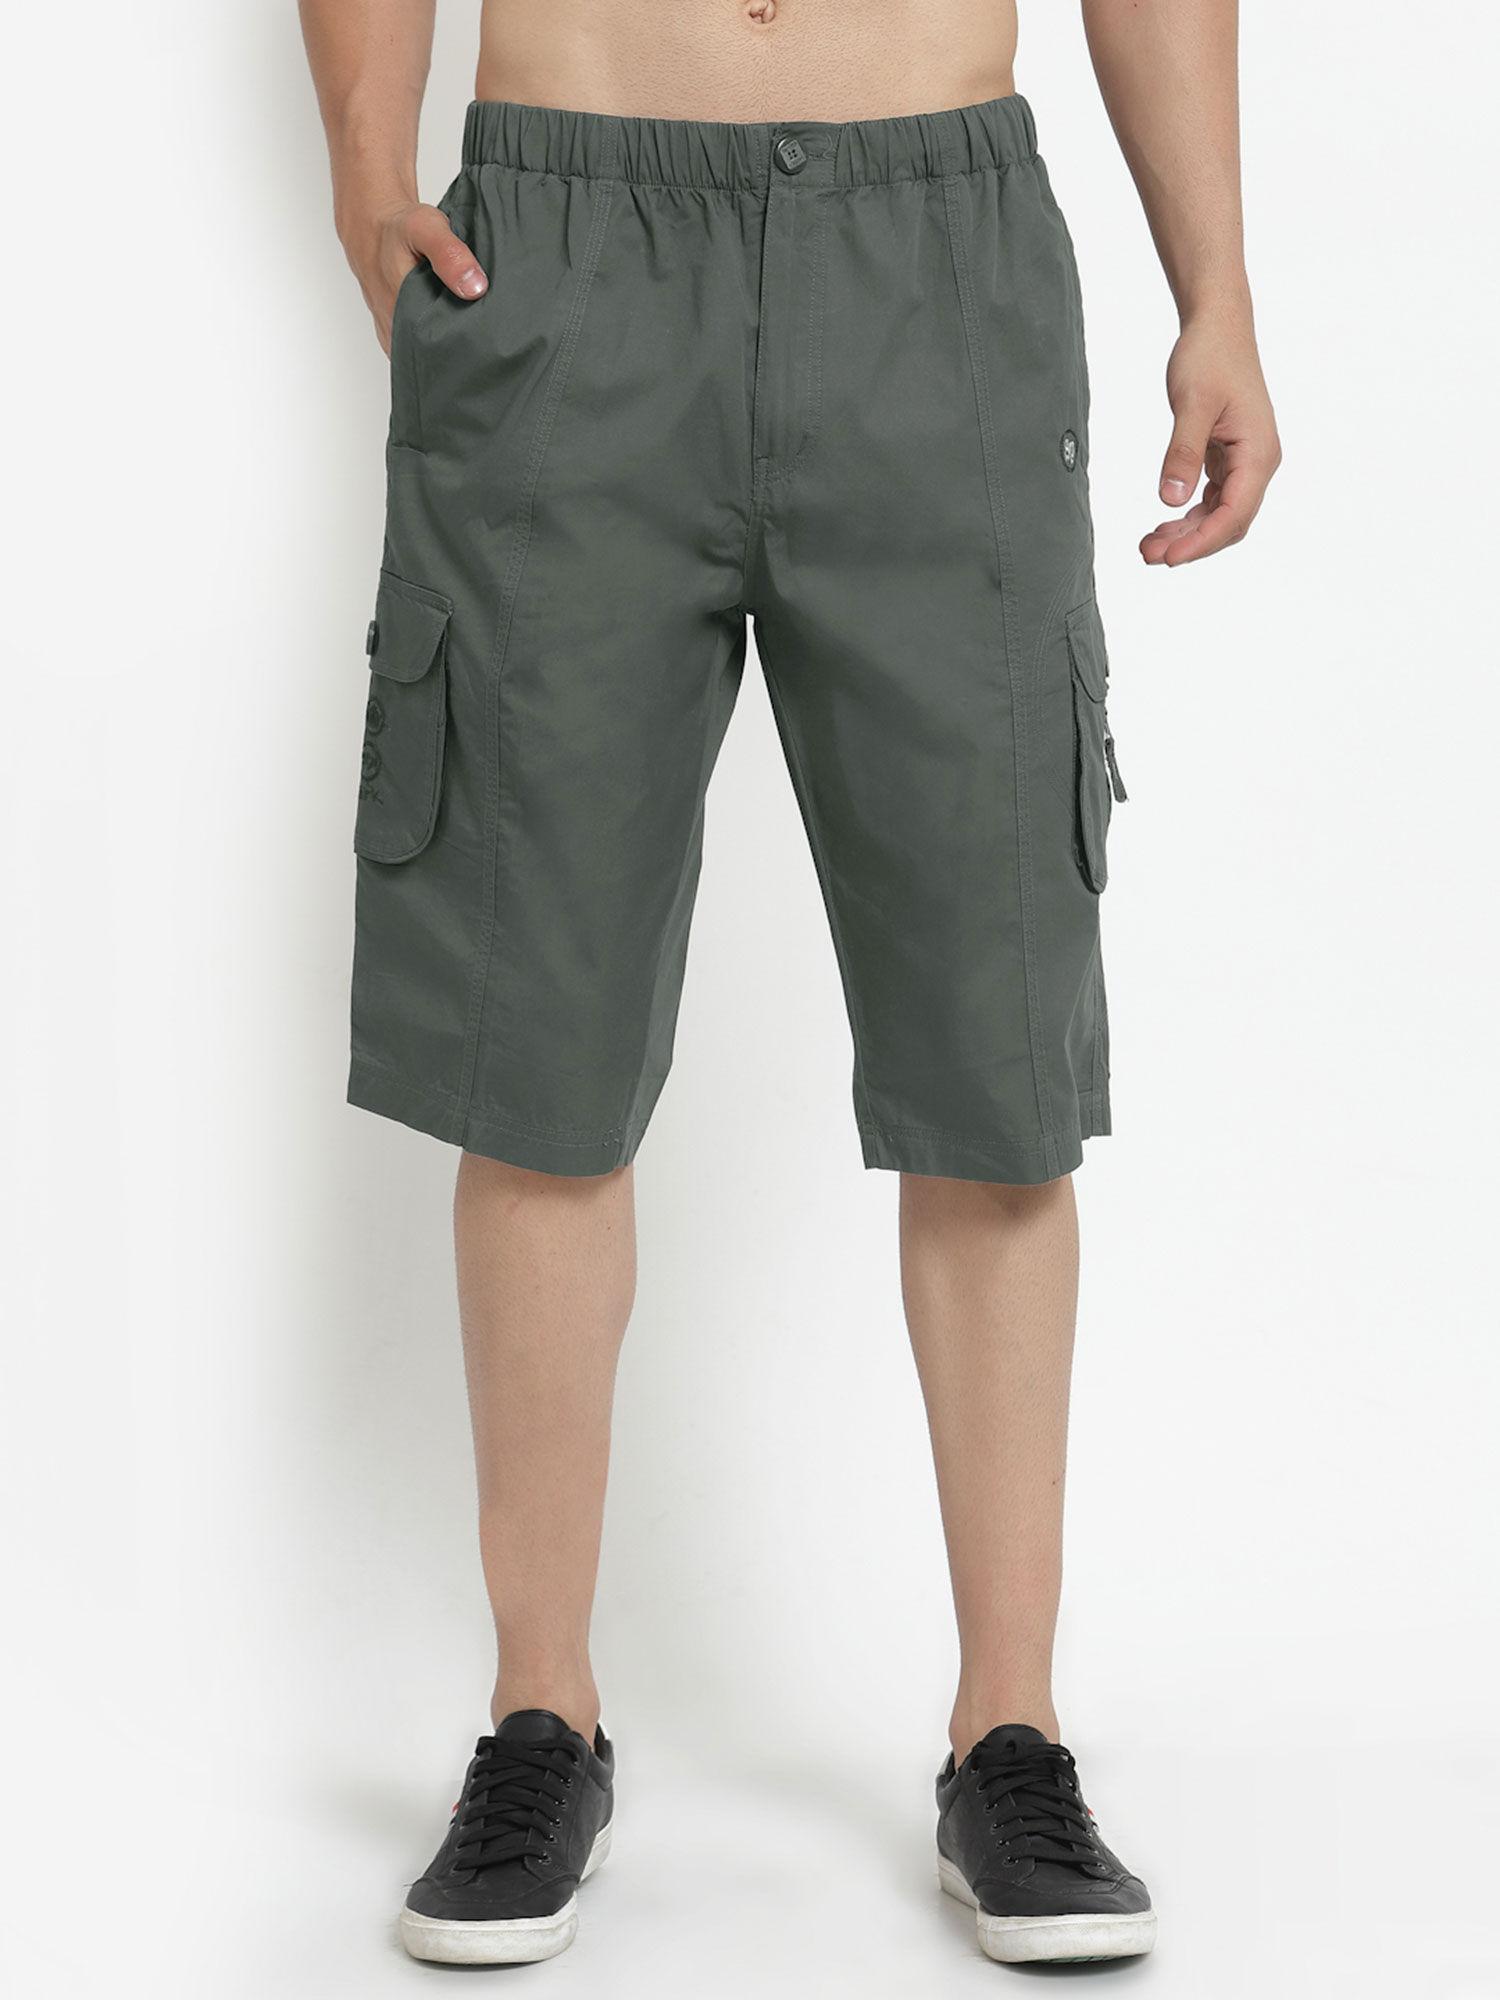 olive cotton casual wear 3/4 shorts